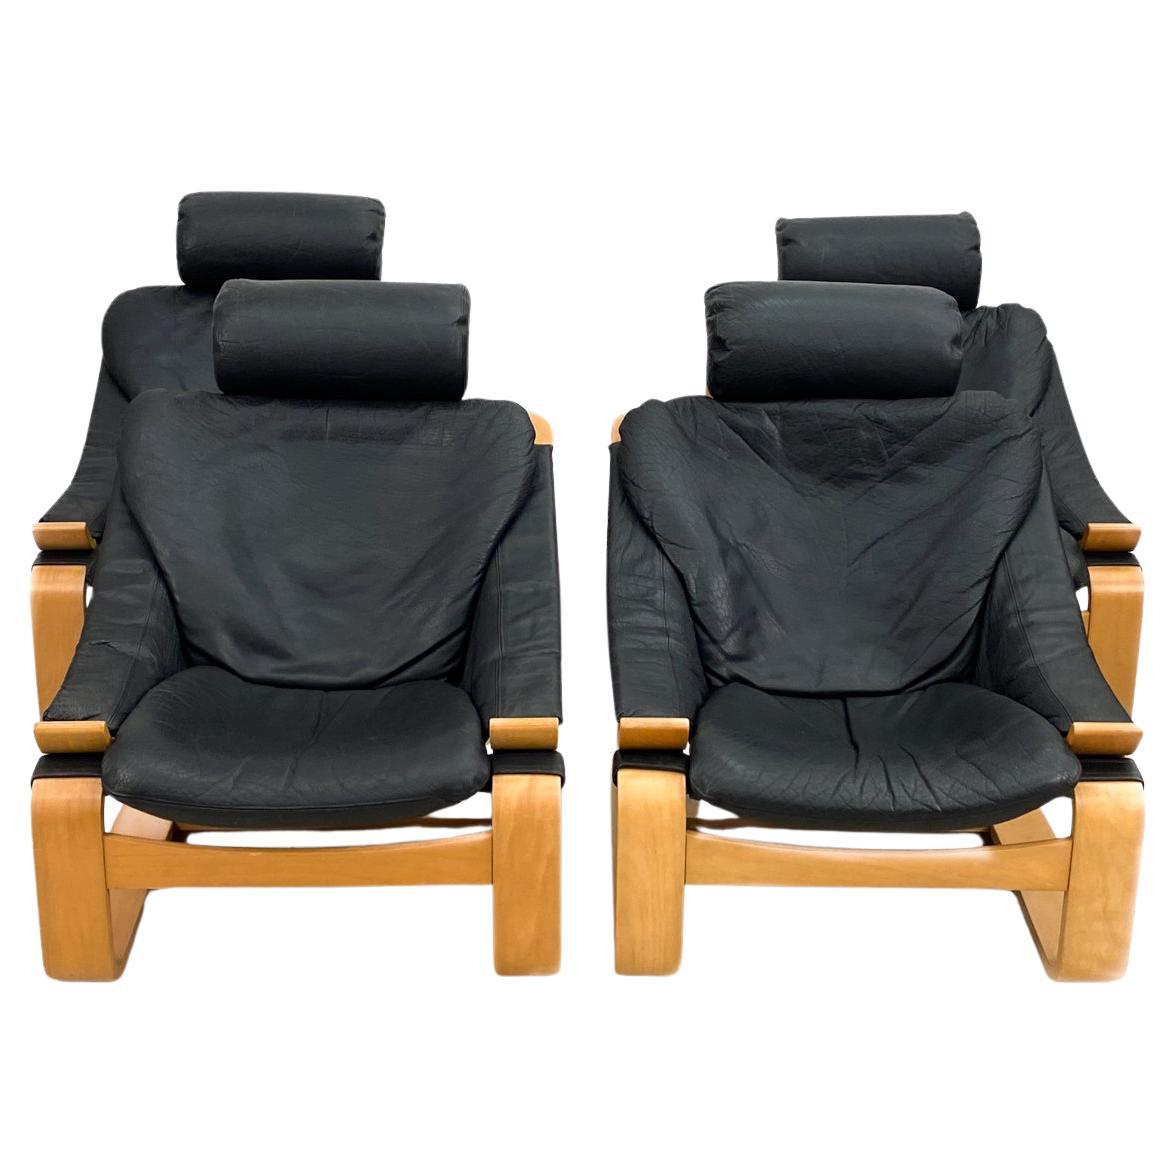 '4' Kroken Buffalo Leather Lounge Chairs by Åke Fribytter for Nelo Sweden, 1970s For Sale